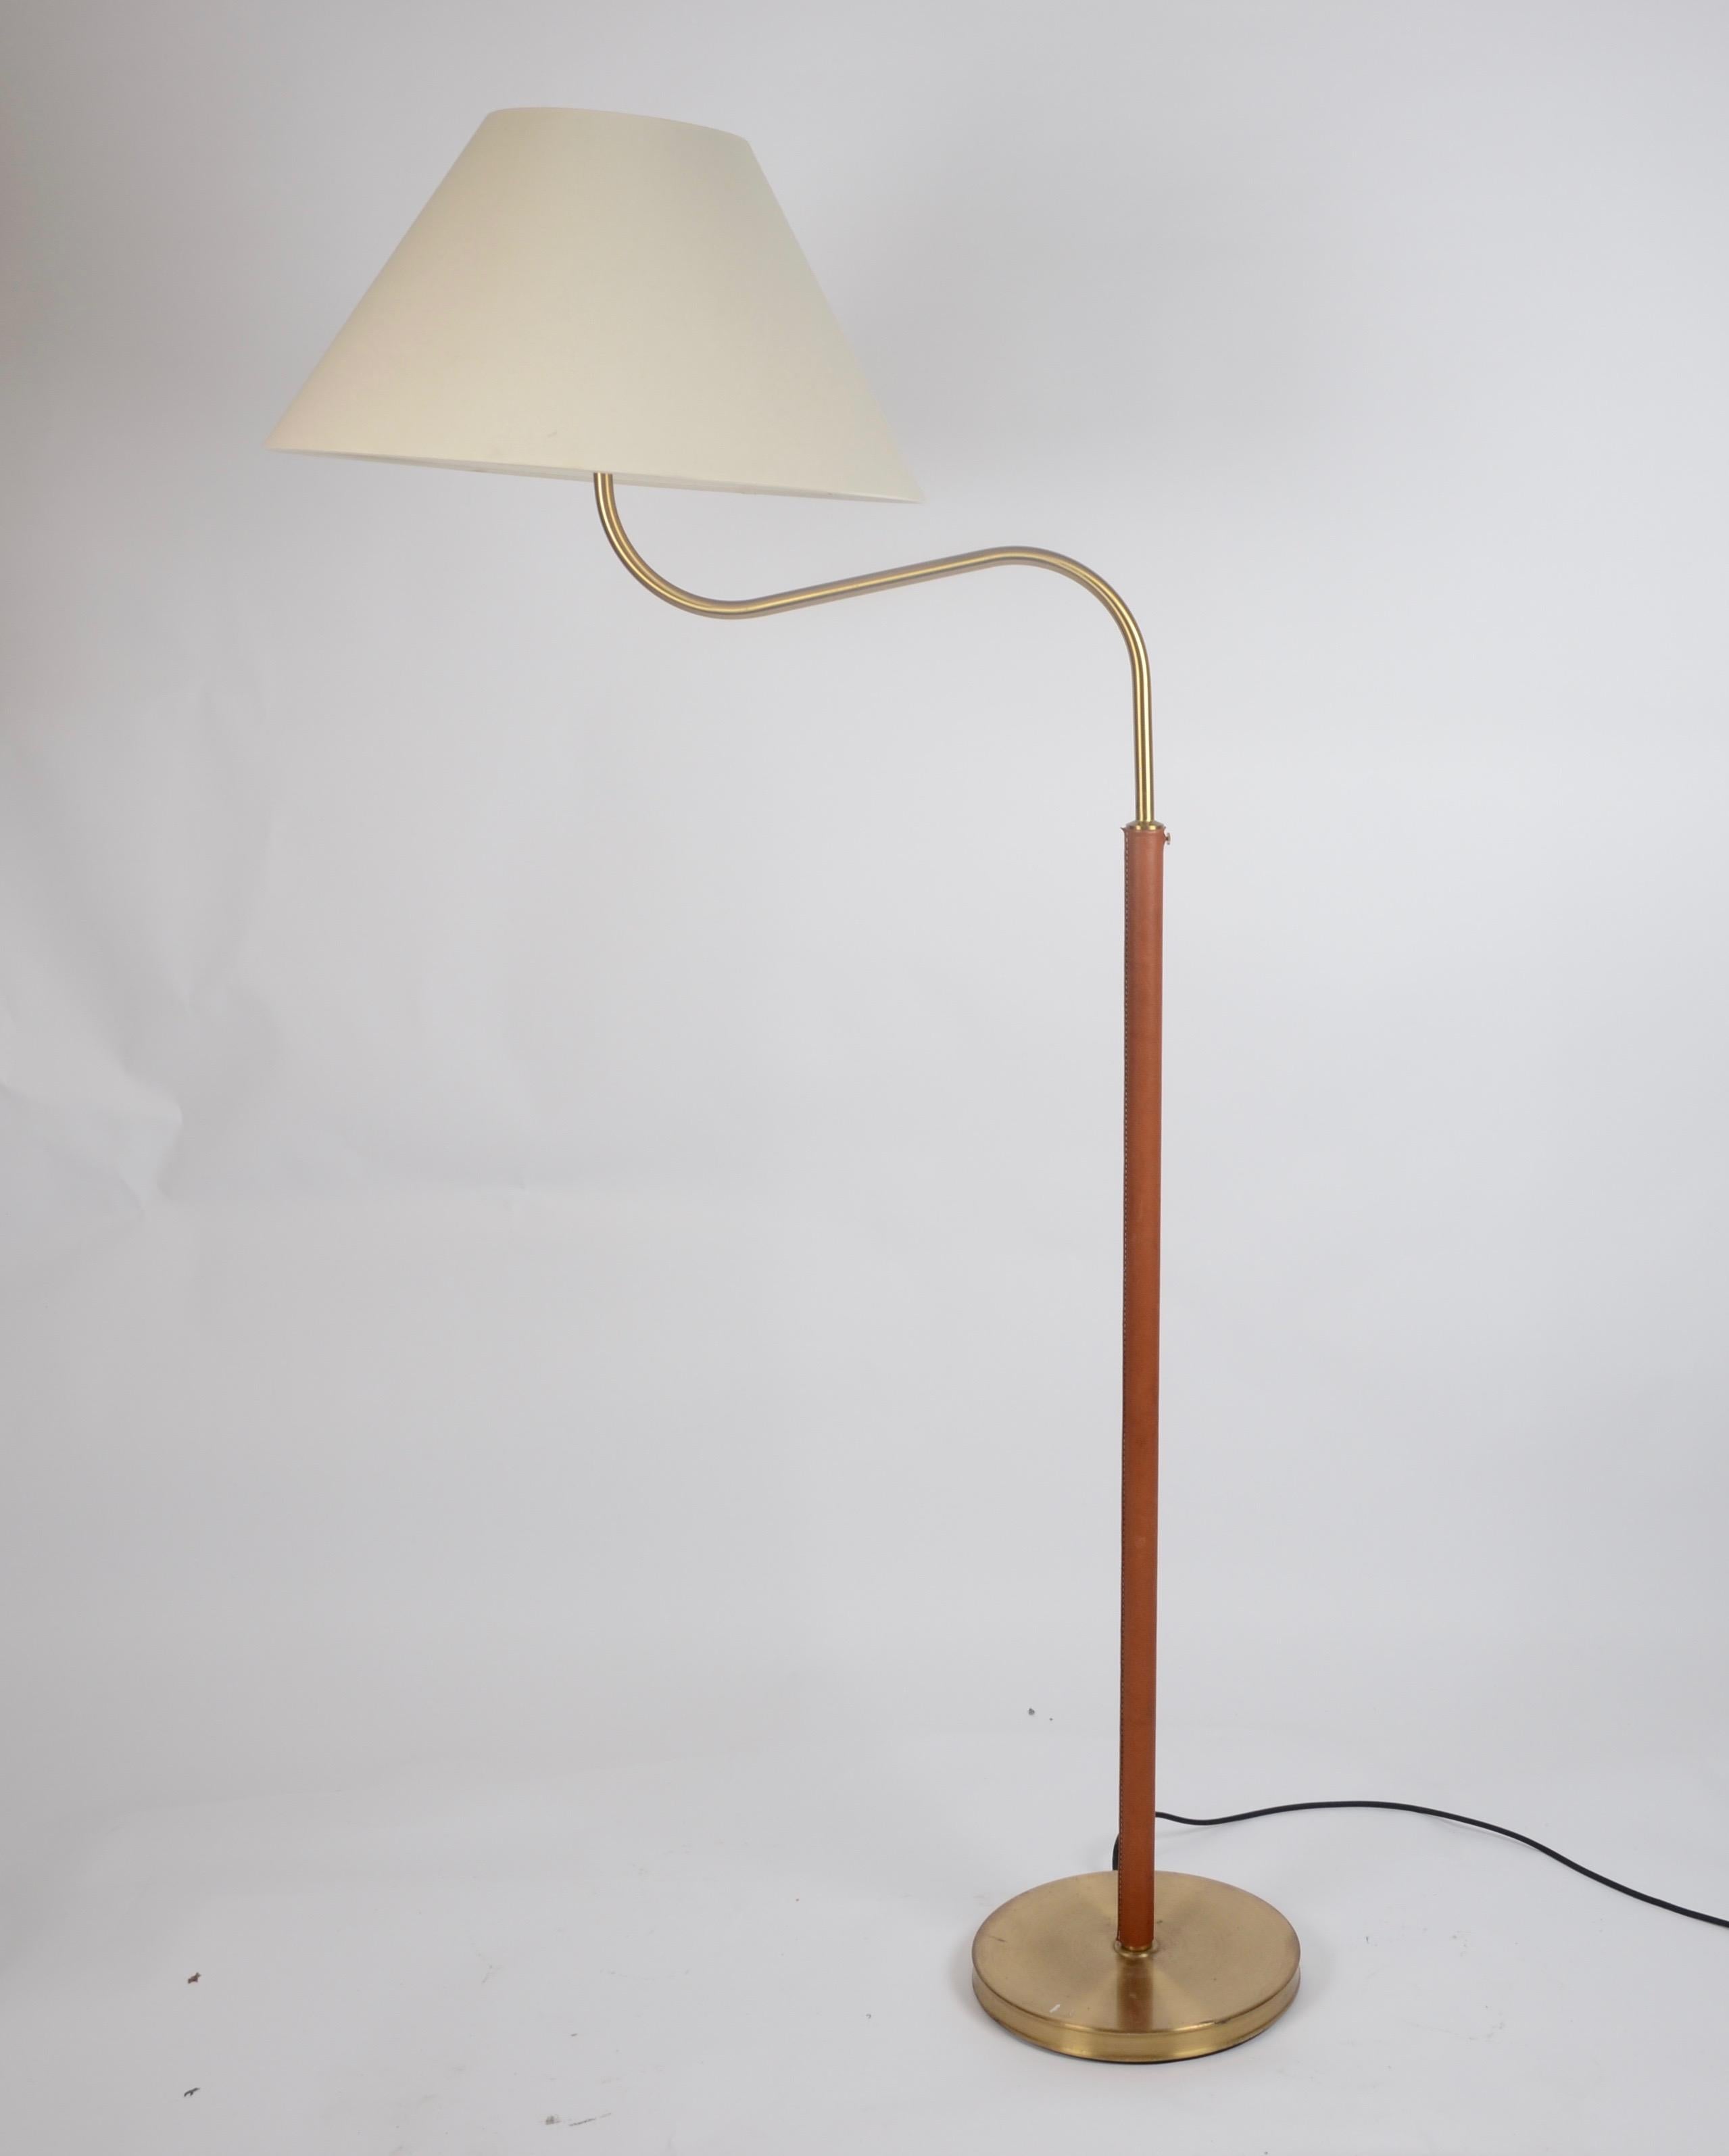 Floor lamp model G 2368, also known as the big camel, designed by Josef Frank in 1939 for Firma Svenskt Tenn. Sweden, mid-1900s. Made in brass and leather.